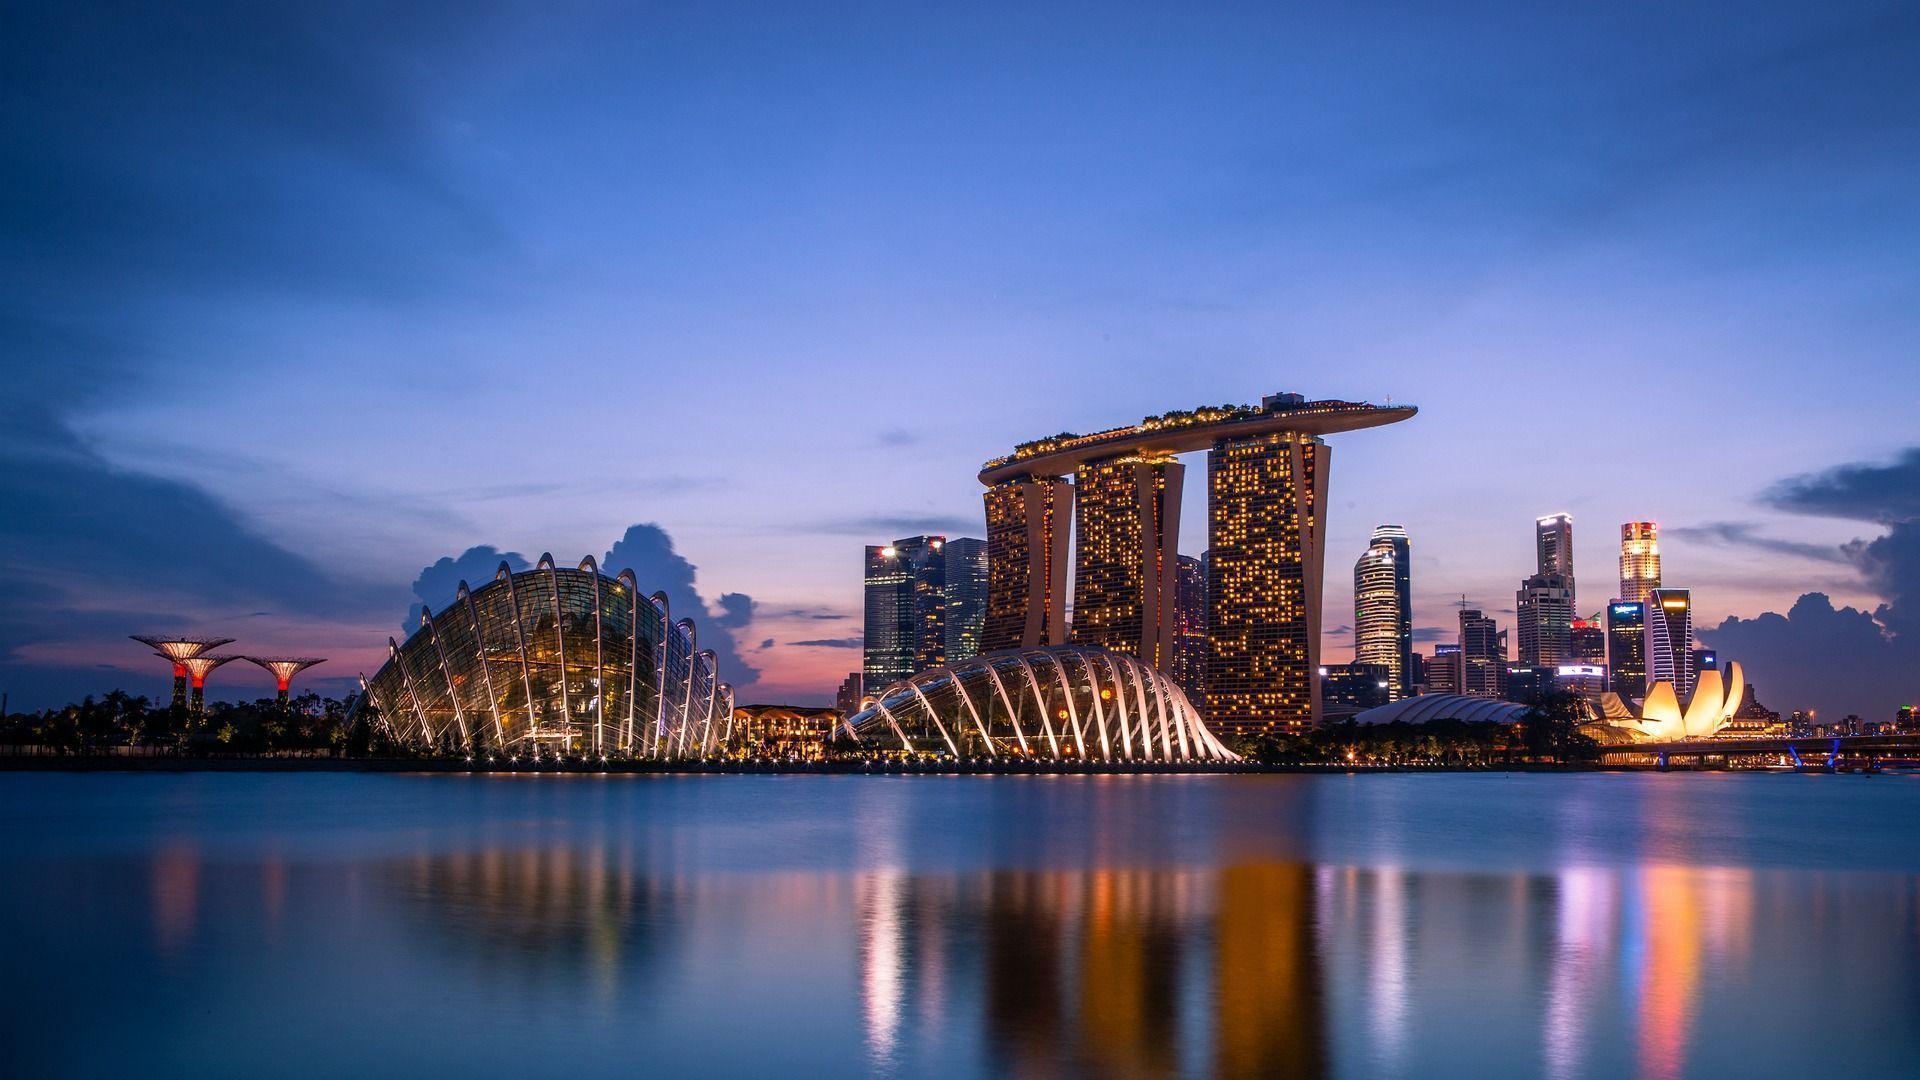 Singapore the city of lions HD Wallpaper Free Download